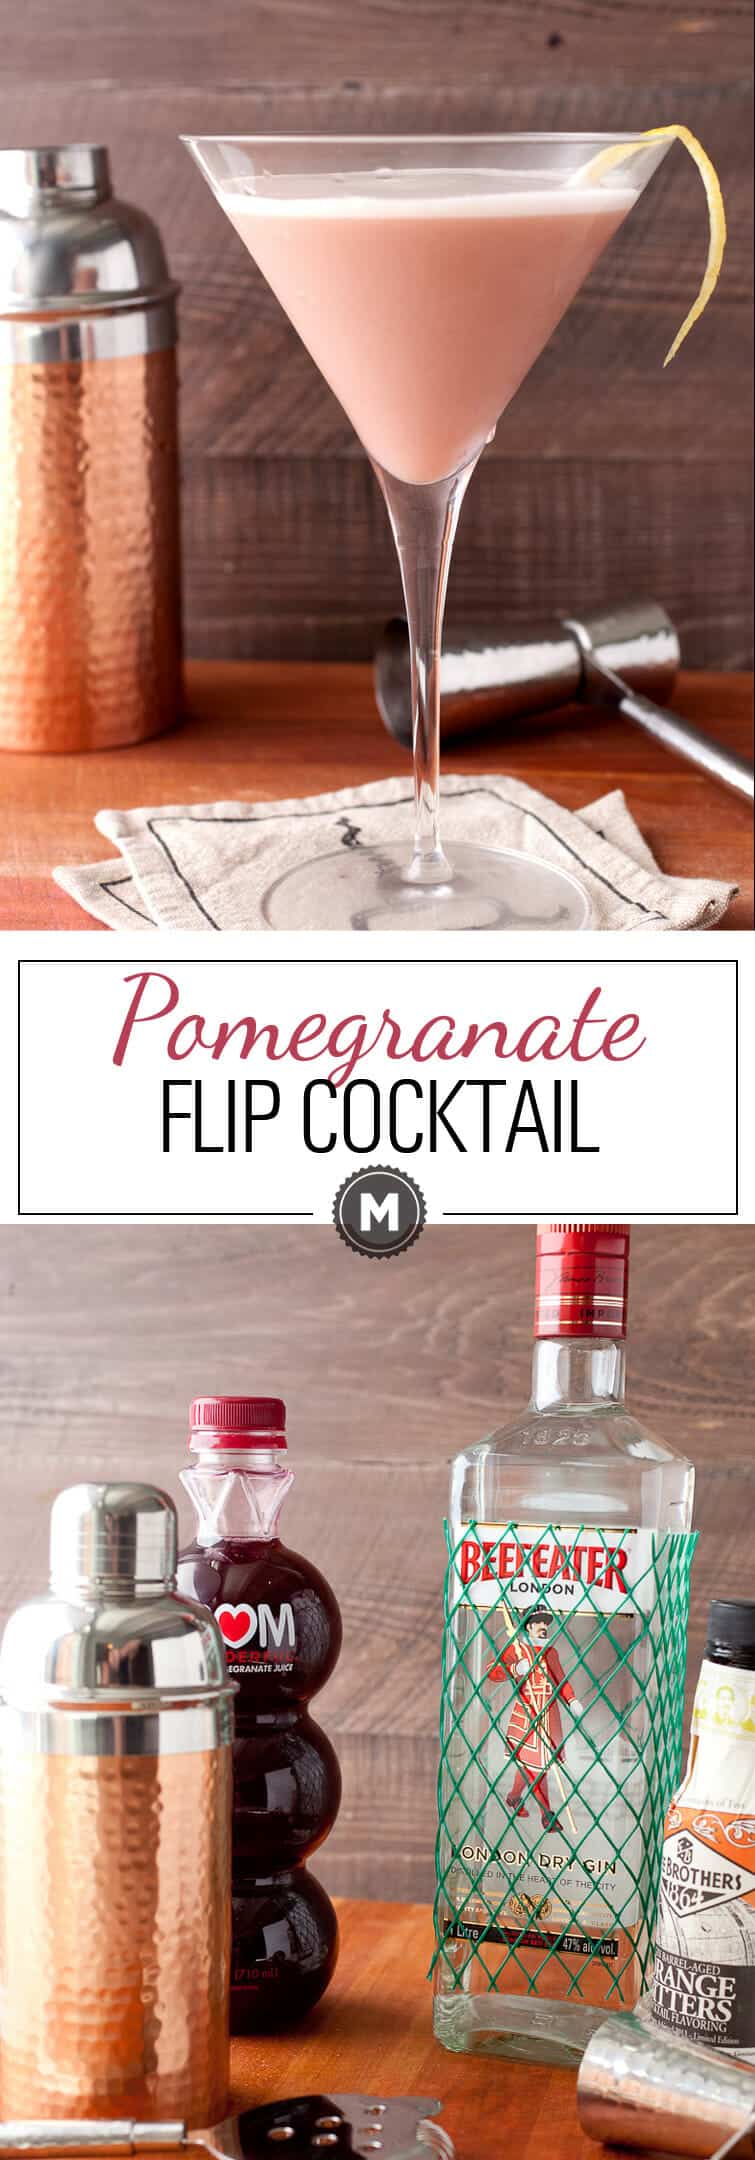 The Pomegranate Flip Cocktail: This easy cocktail is a classic but with a modern twist! It's perfect for a hot summer day: light and refreshing! The secret ingredient to a real flip cocktail: EGG WHITE! Don't skip it! Click through to learn how to make it right! | macheesmo.com